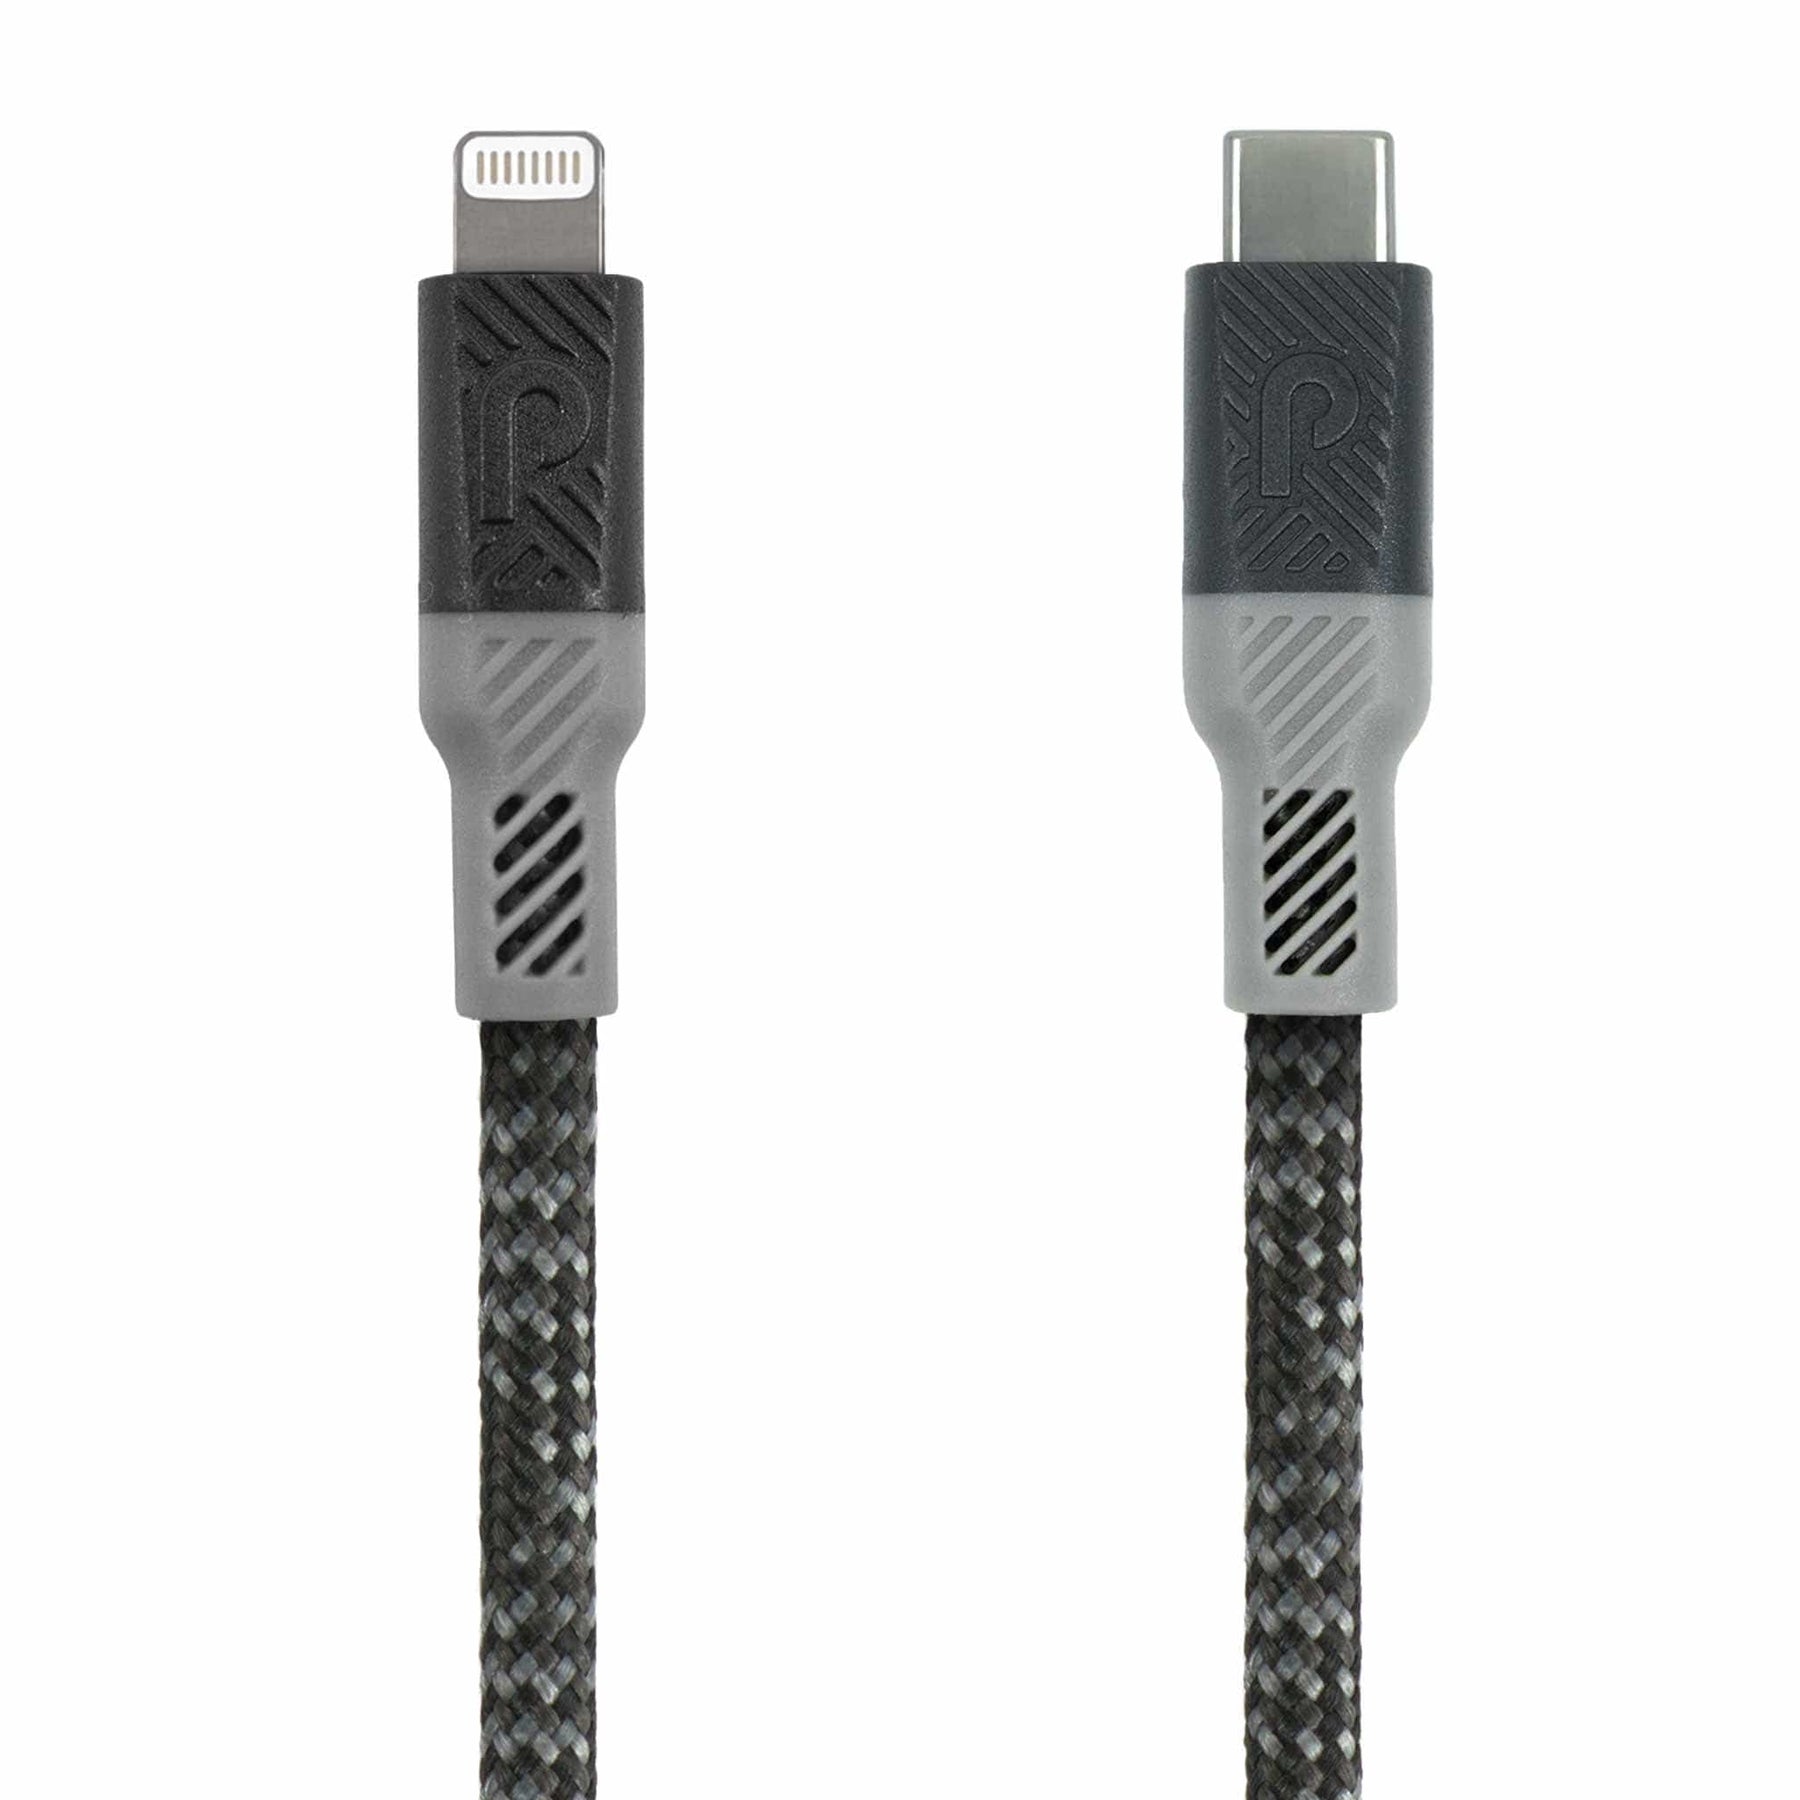 USB C Female to USB 3.0 Male Cable Adapter (2 Pack),Double-Sided 5Gbps GEN  1 USB Type A 3.1 Connector for MagSafe Charger,iPhone 11 12 iPad 8 Pro  Max,Samsung Galaxy Note 10 S20